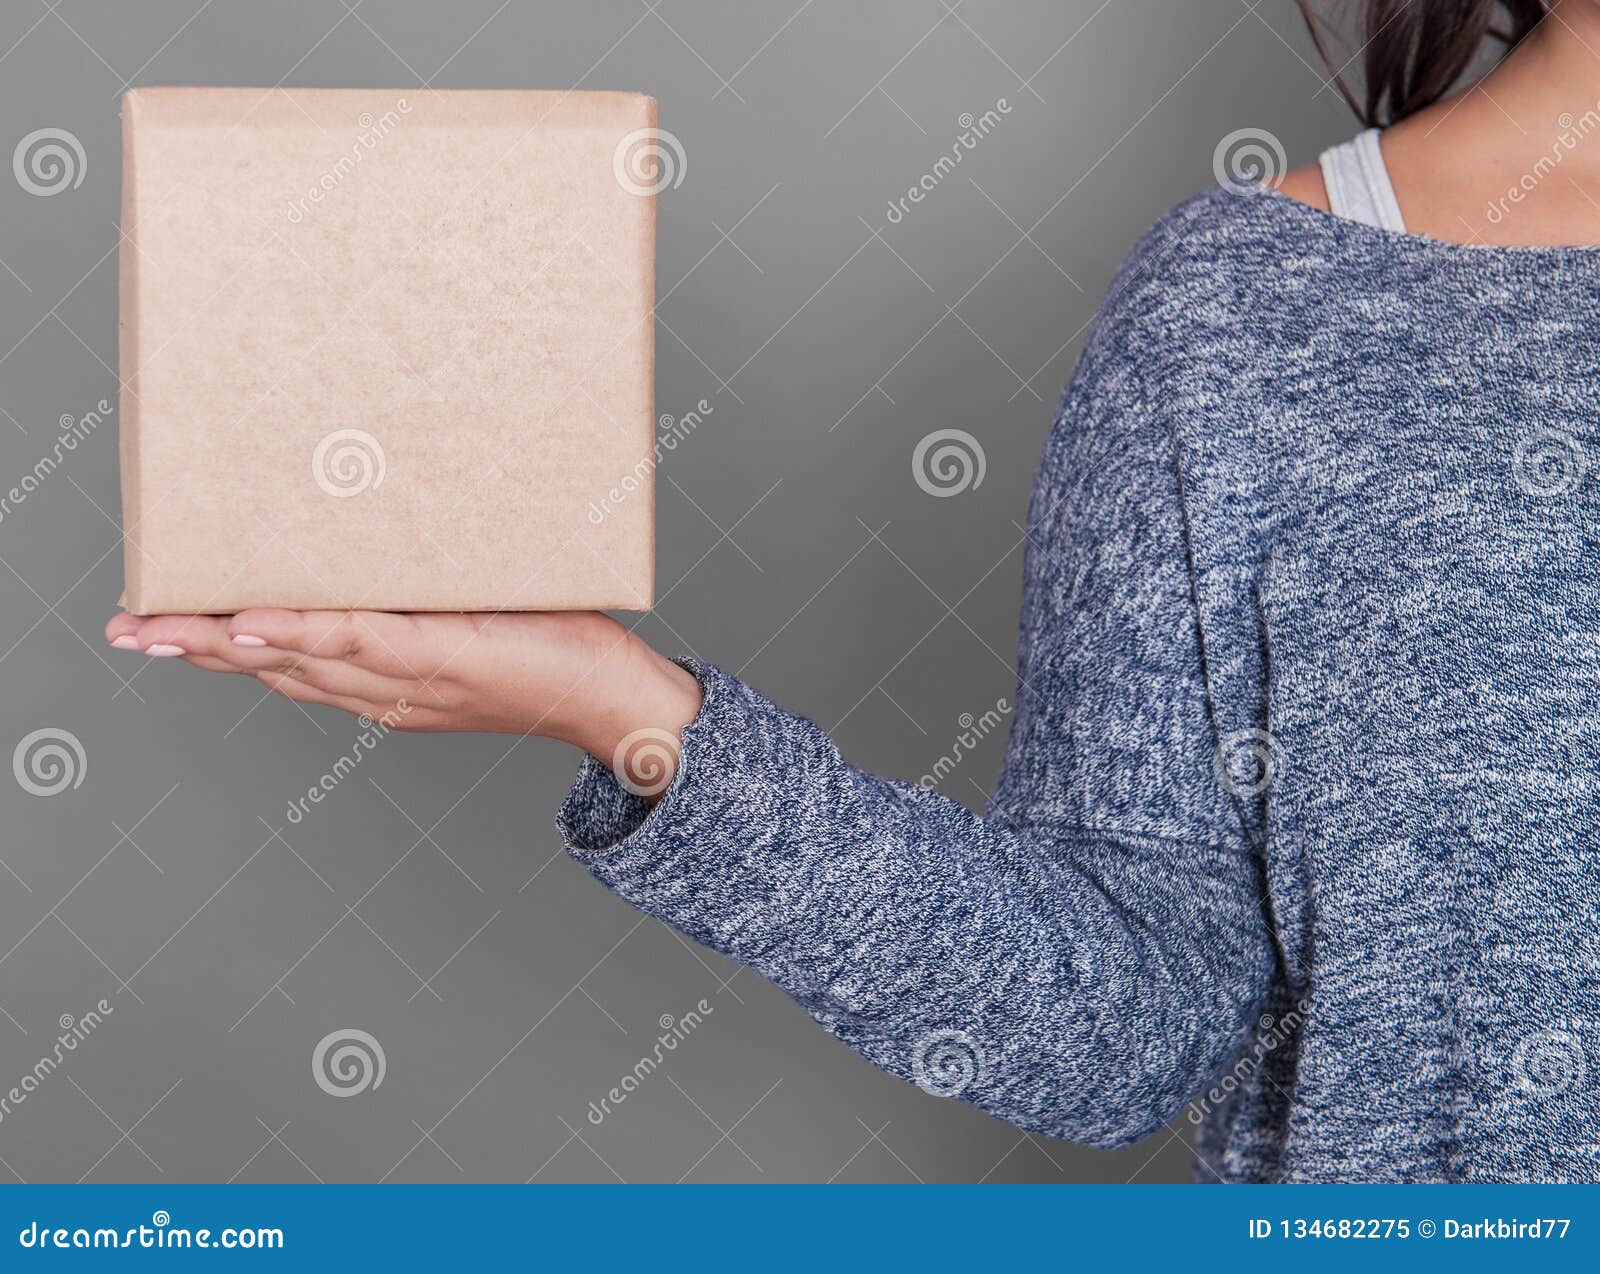 Download Woman Holding Blank Carton Box Mockup For Design Stock Image Image Of Mock Object 134682275